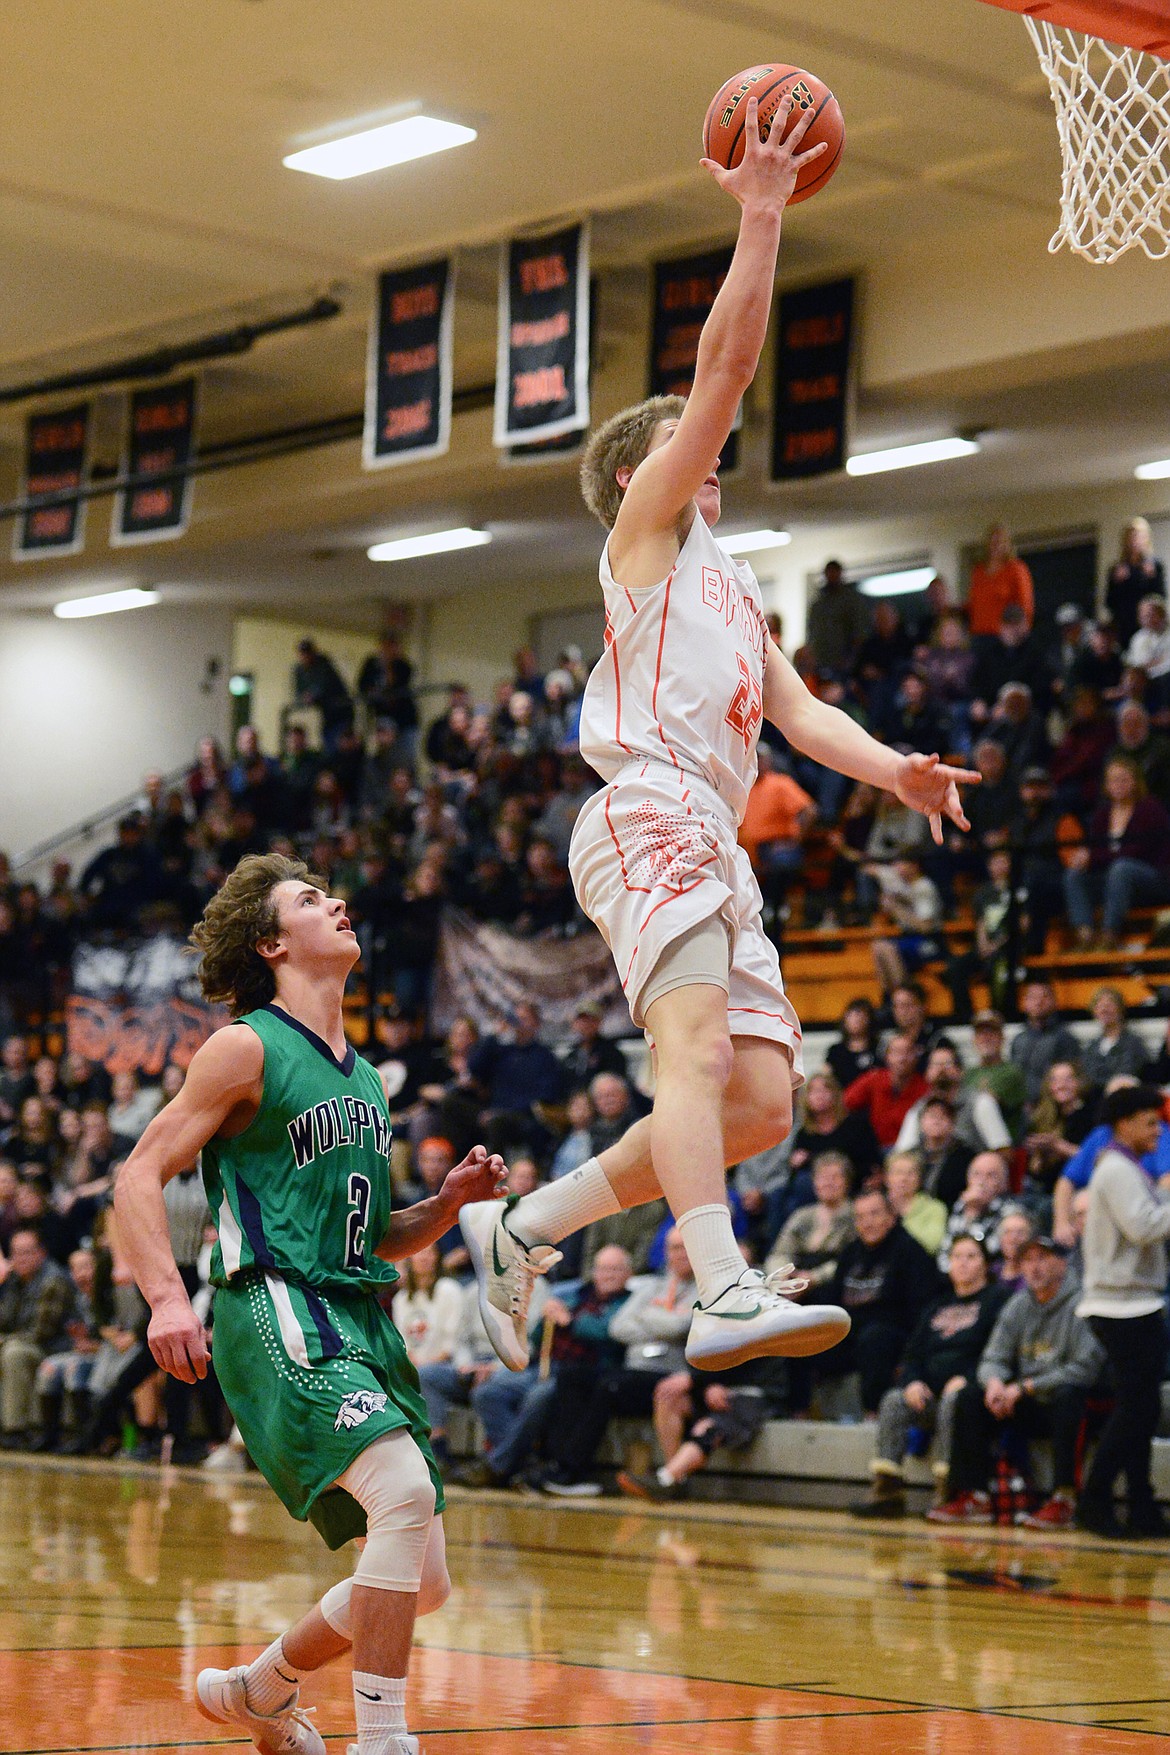 Flathead's Seth Moon (22) heads to the hoop in front of Glacier's Drew Deck (2) during a crosstown matchup at Flathead High School on Tuesday. (Casey Kreider/Daily Inter Lake)